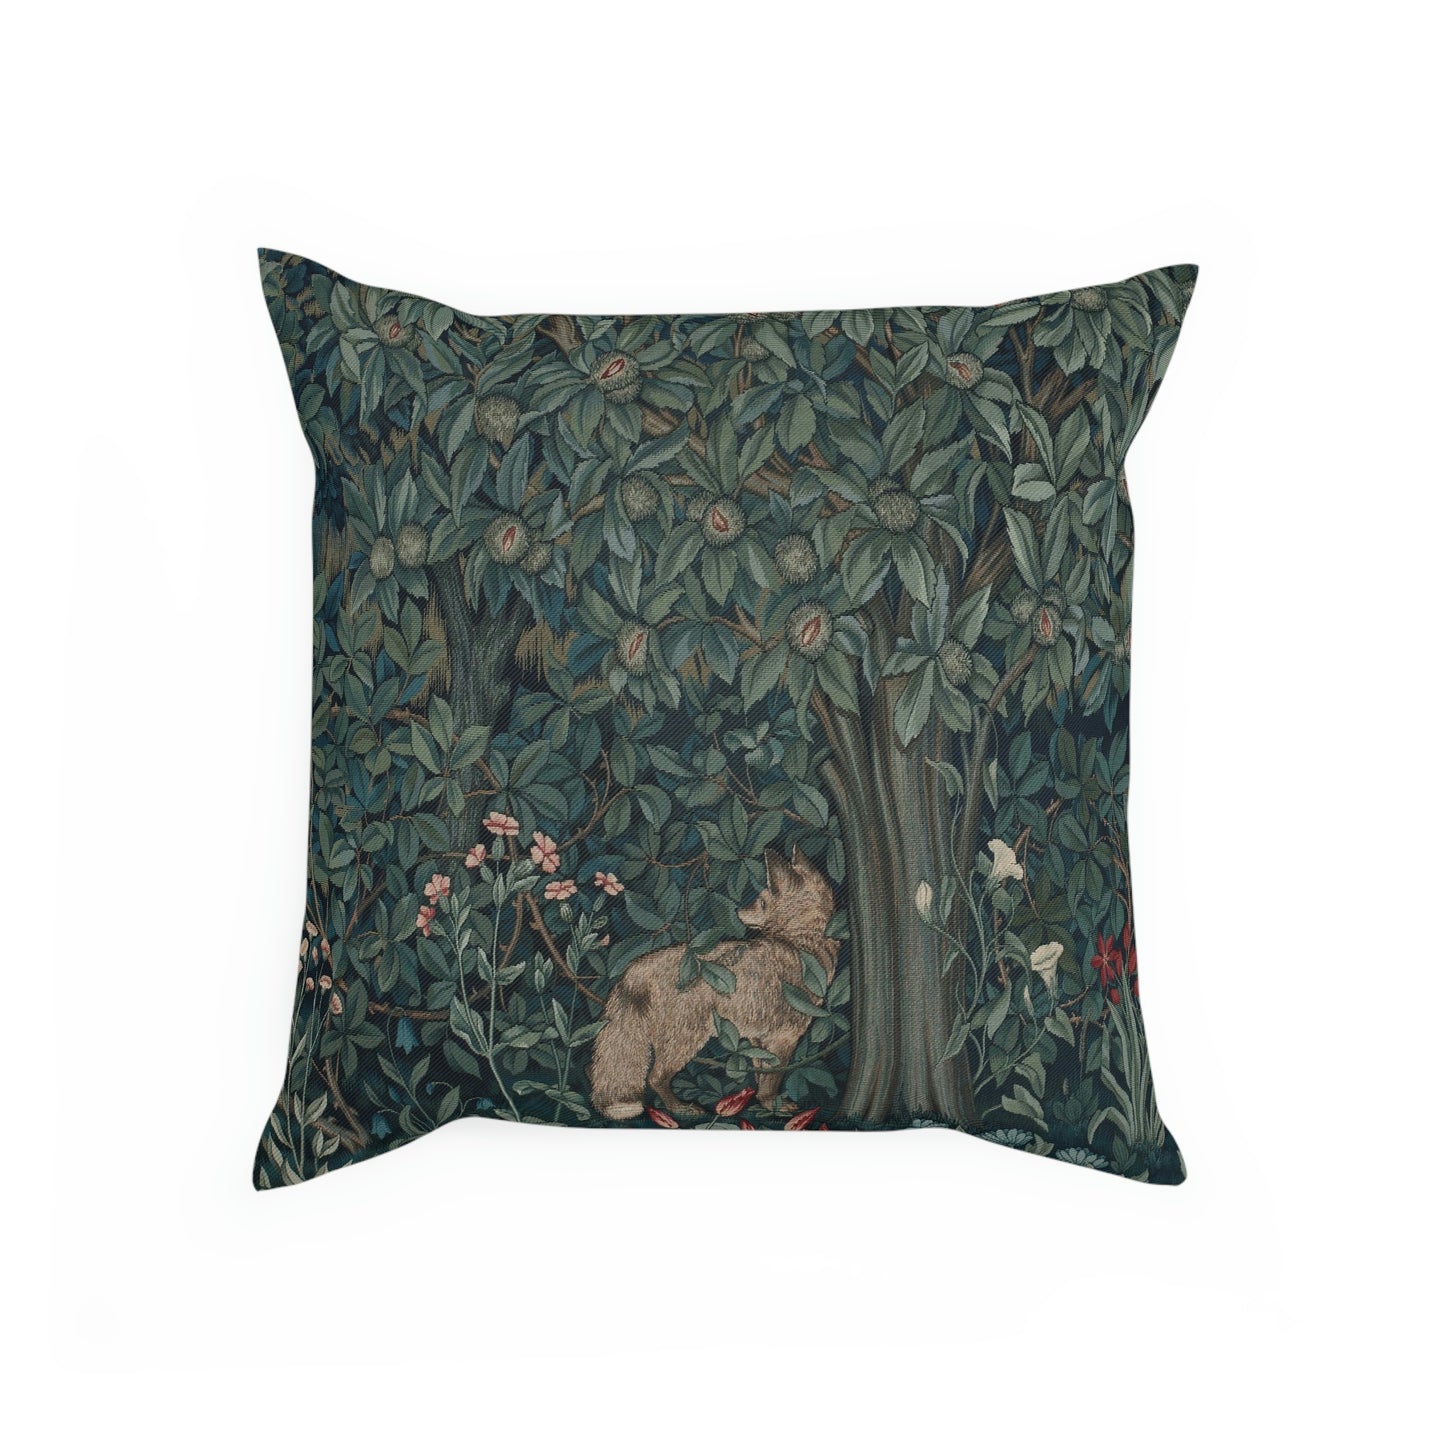 William-Morris-and-Co-Cushion-and-Cushion-Cover-Fox-by-John-Henry-Dearle-Green-Forest-Collection-7